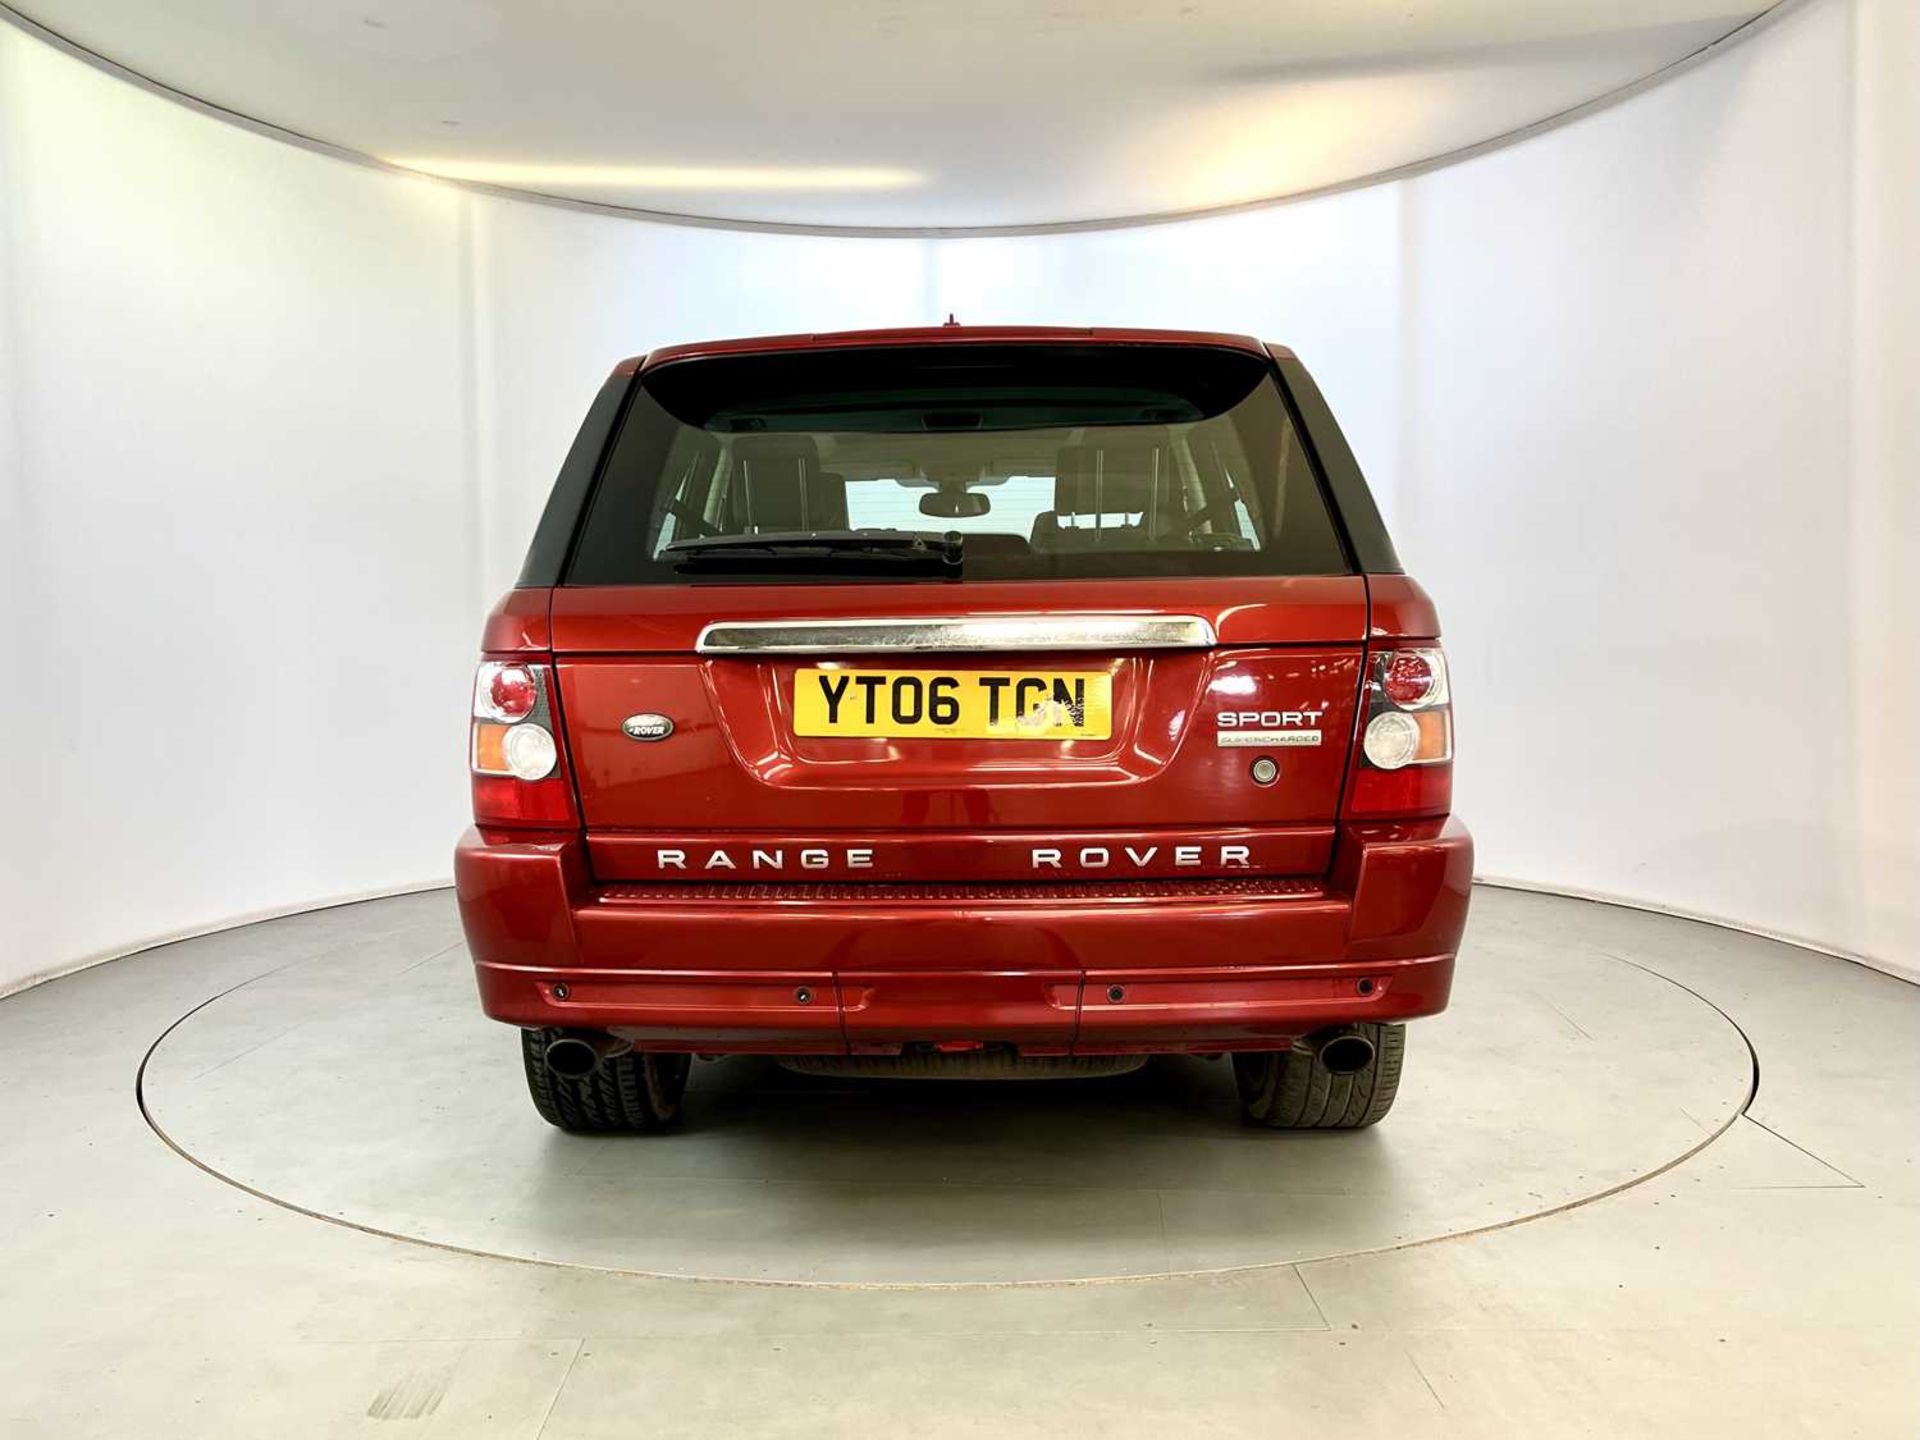 2006 Range Rover Sport 4.2 Supercharged - Image 8 of 34